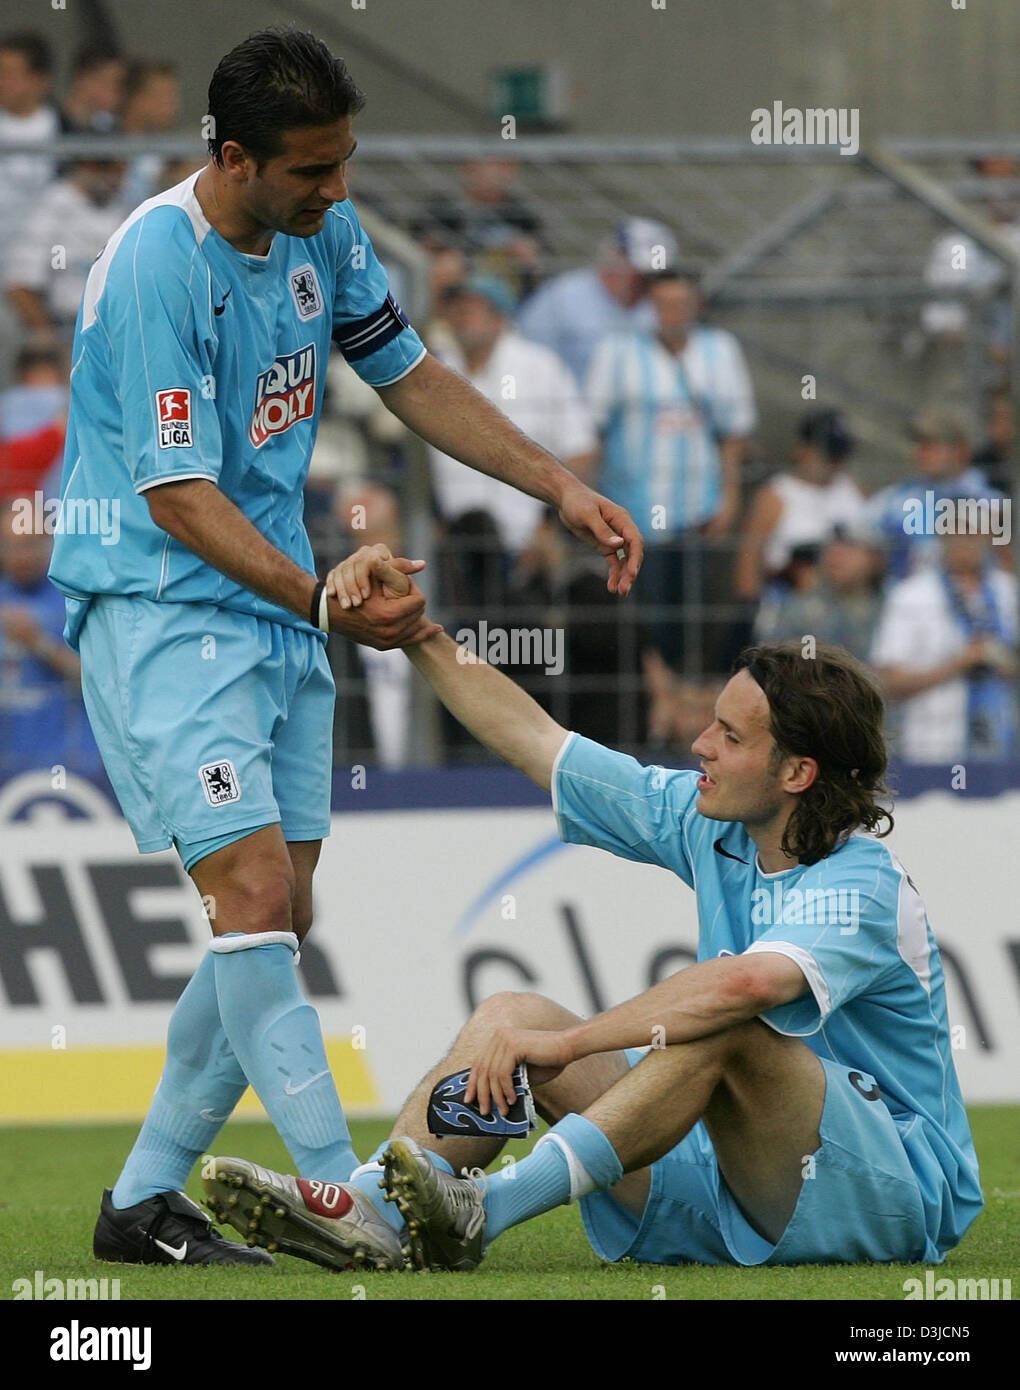 (dpa) - Players Remo Mayer and Paul Agostino (R-L) of soccer club TSV 1860 Munich look extremely depressed after their 3-4 defeat against LR Ahlen in the Second Bundesliga match at the Gruenwalder stadium in Munich, Germany, 22 May 2005. Munich failed to qualify for Germany's top soccer division. Stock Photo